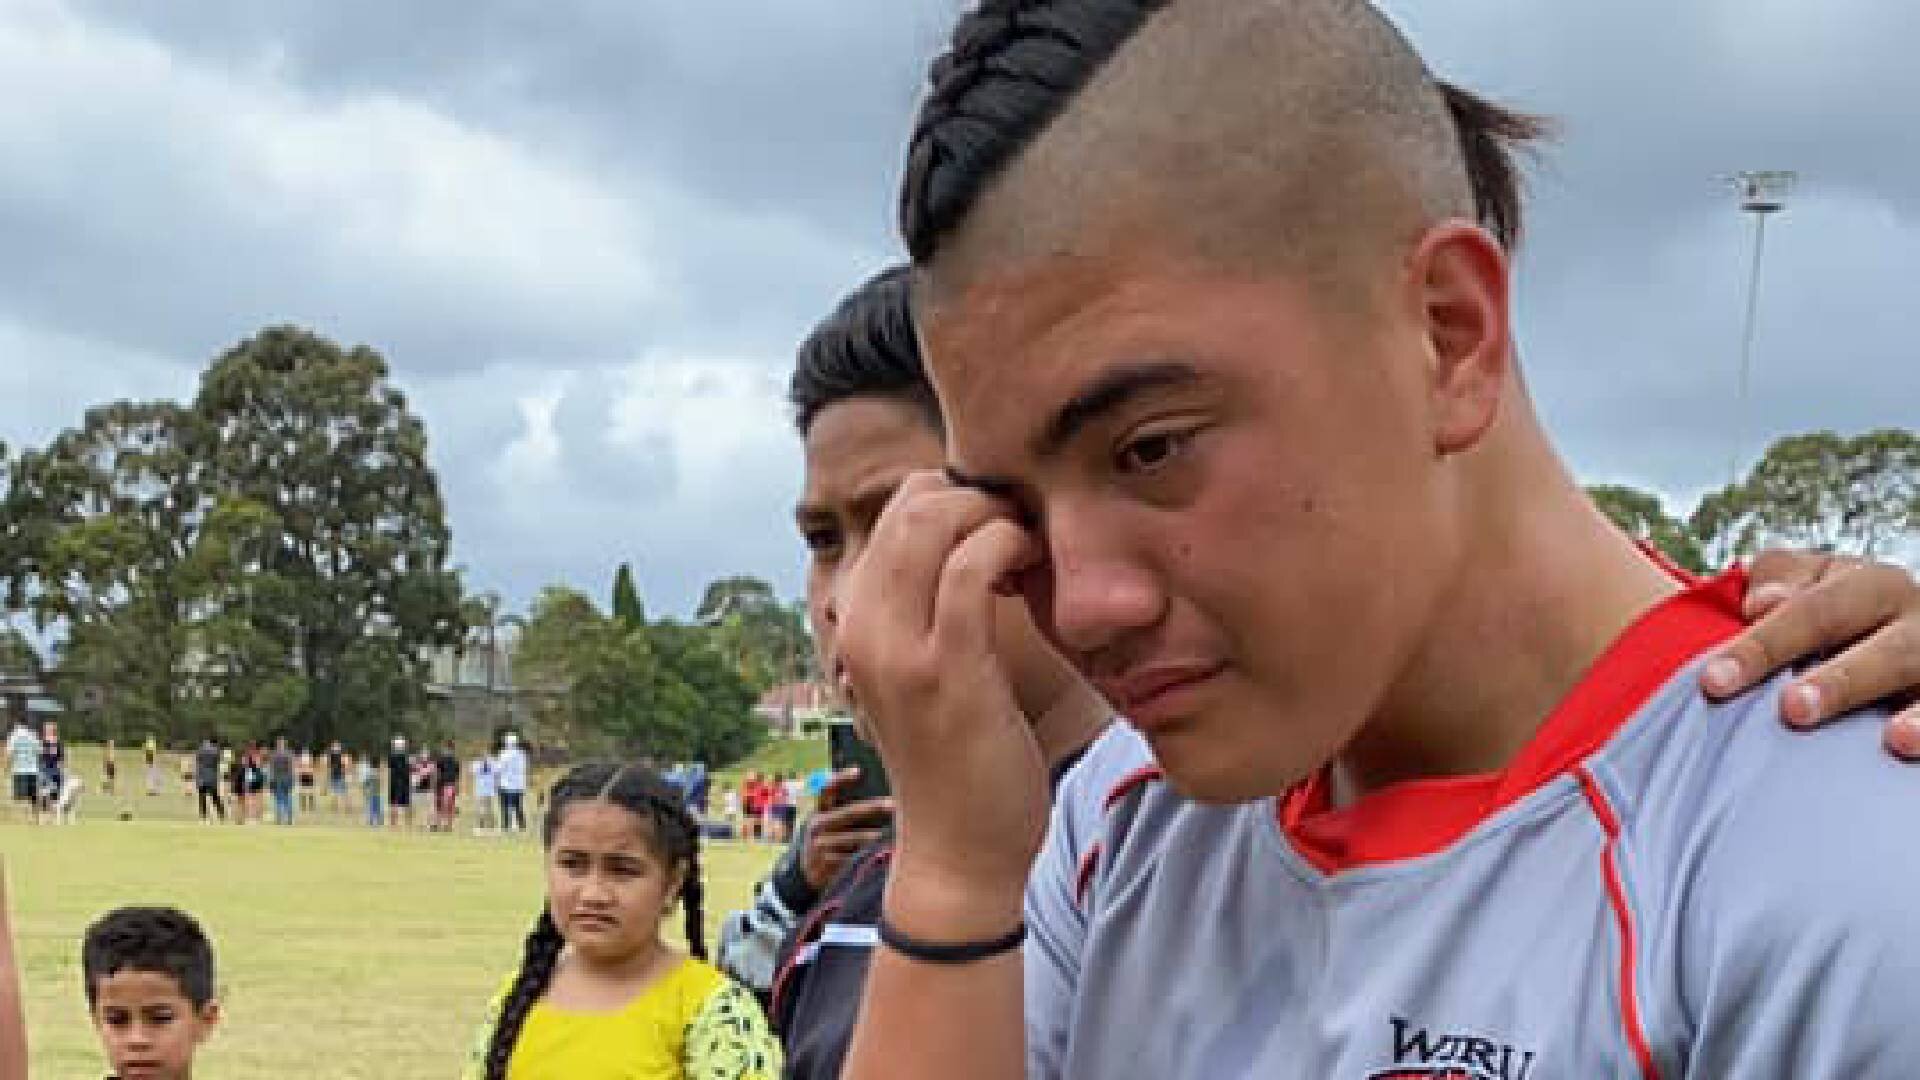 Outrage as 11-year-old boy is told he is too big to play in New South Wales sevens tournament